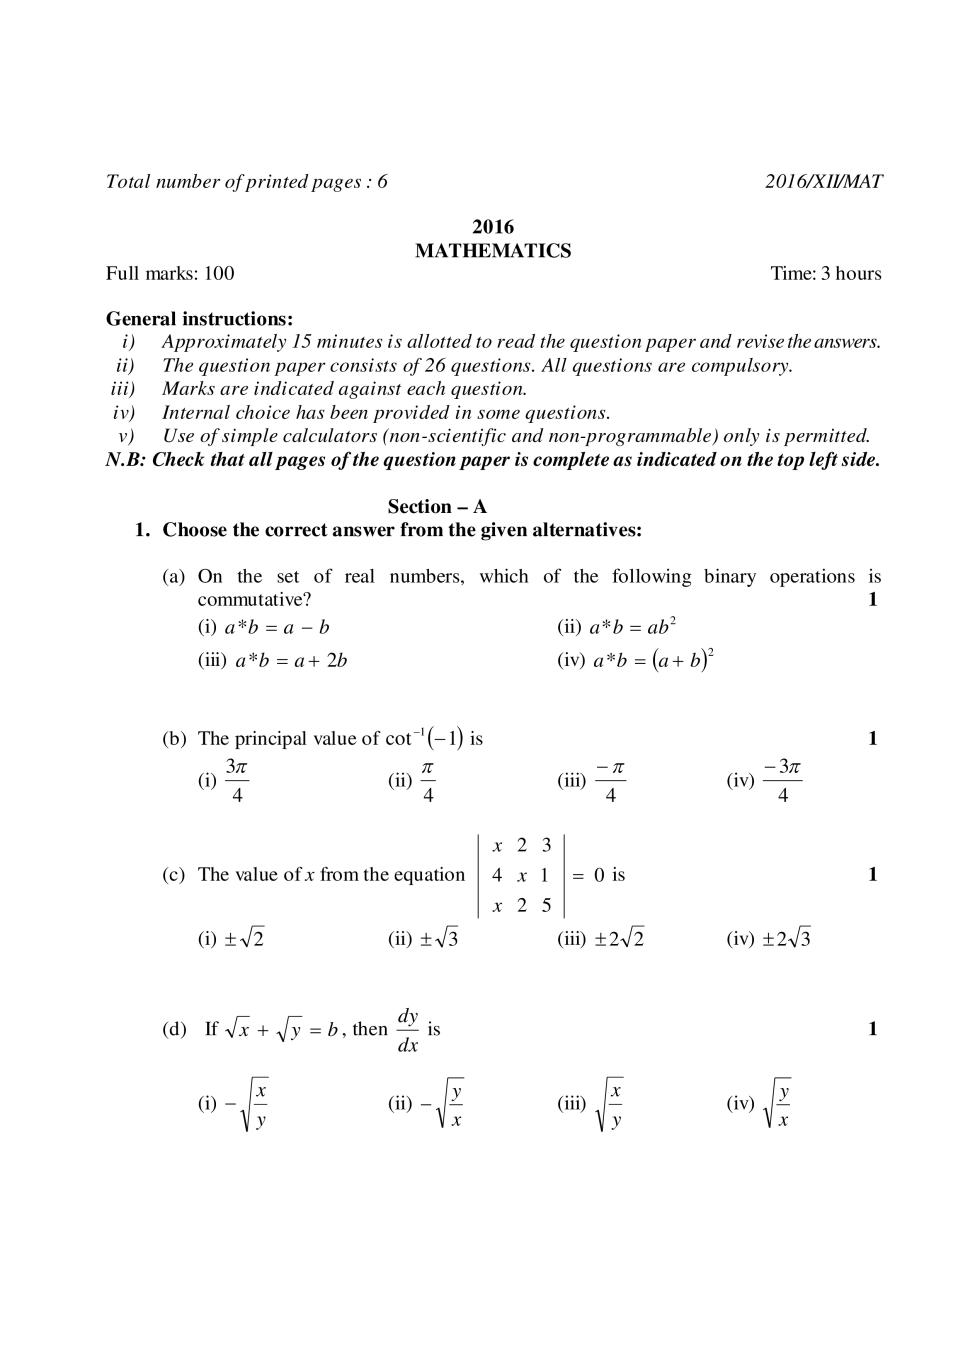 NBSE Class 12 Question Paper 2016 for Maths - Page 1